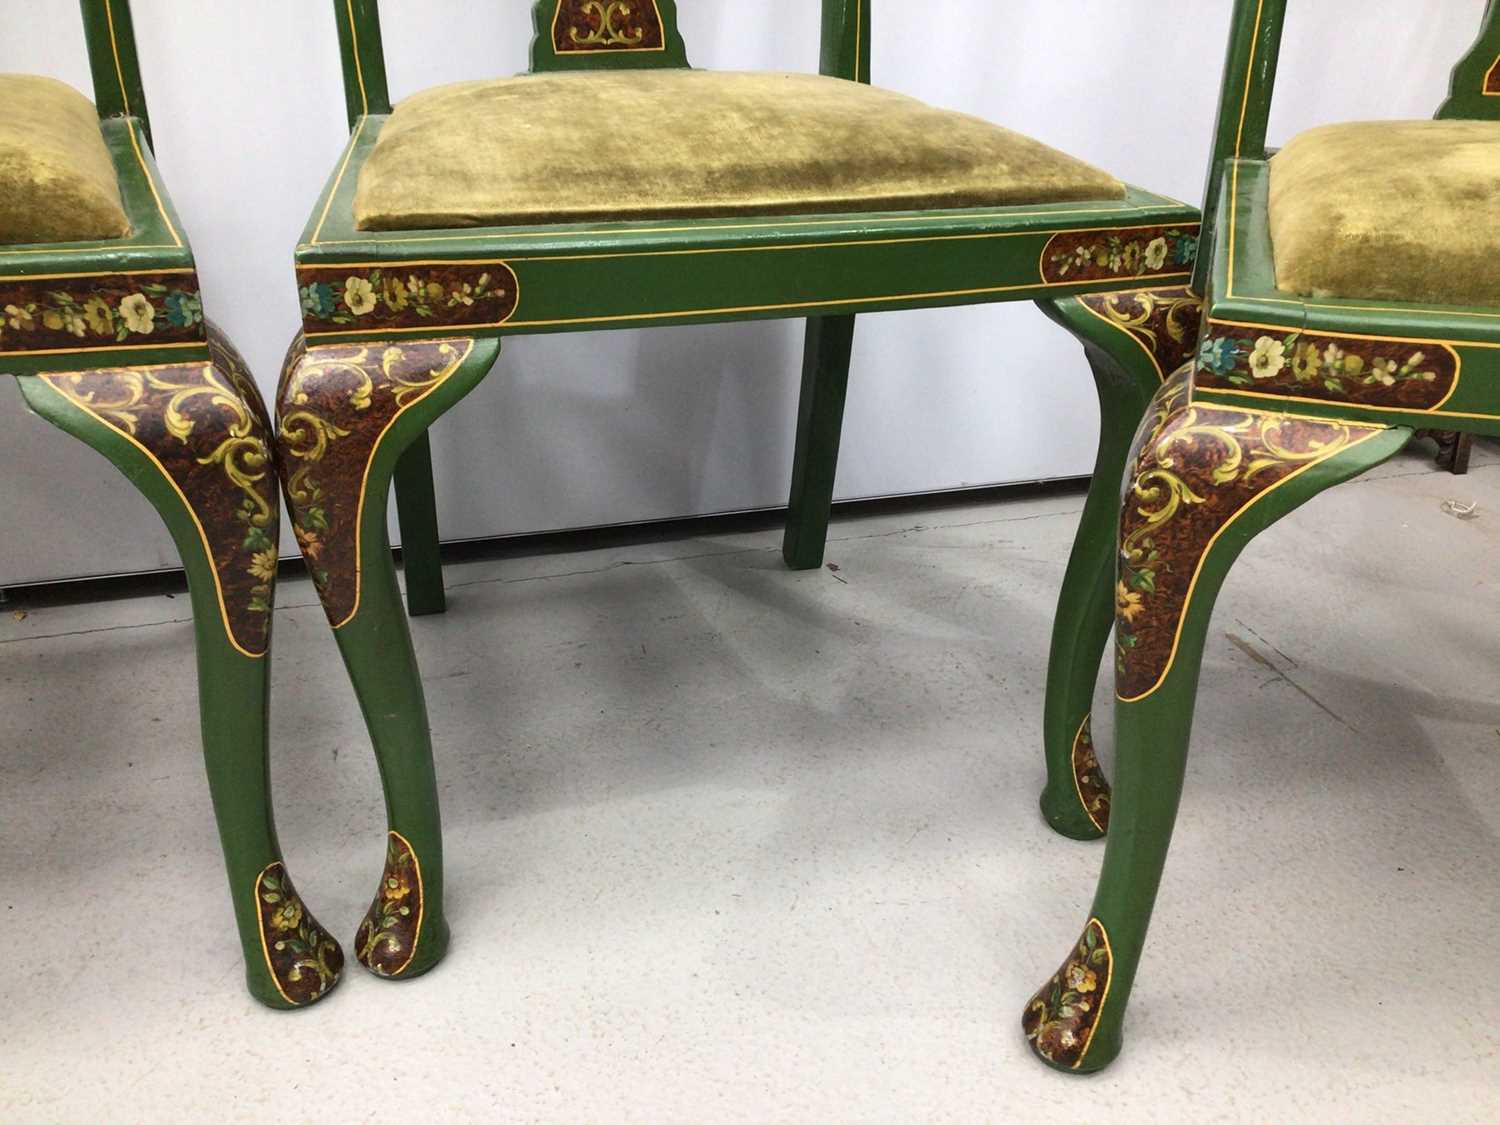 Set of four green painted dining chairs with two rush seated chairs - Image 3 of 7